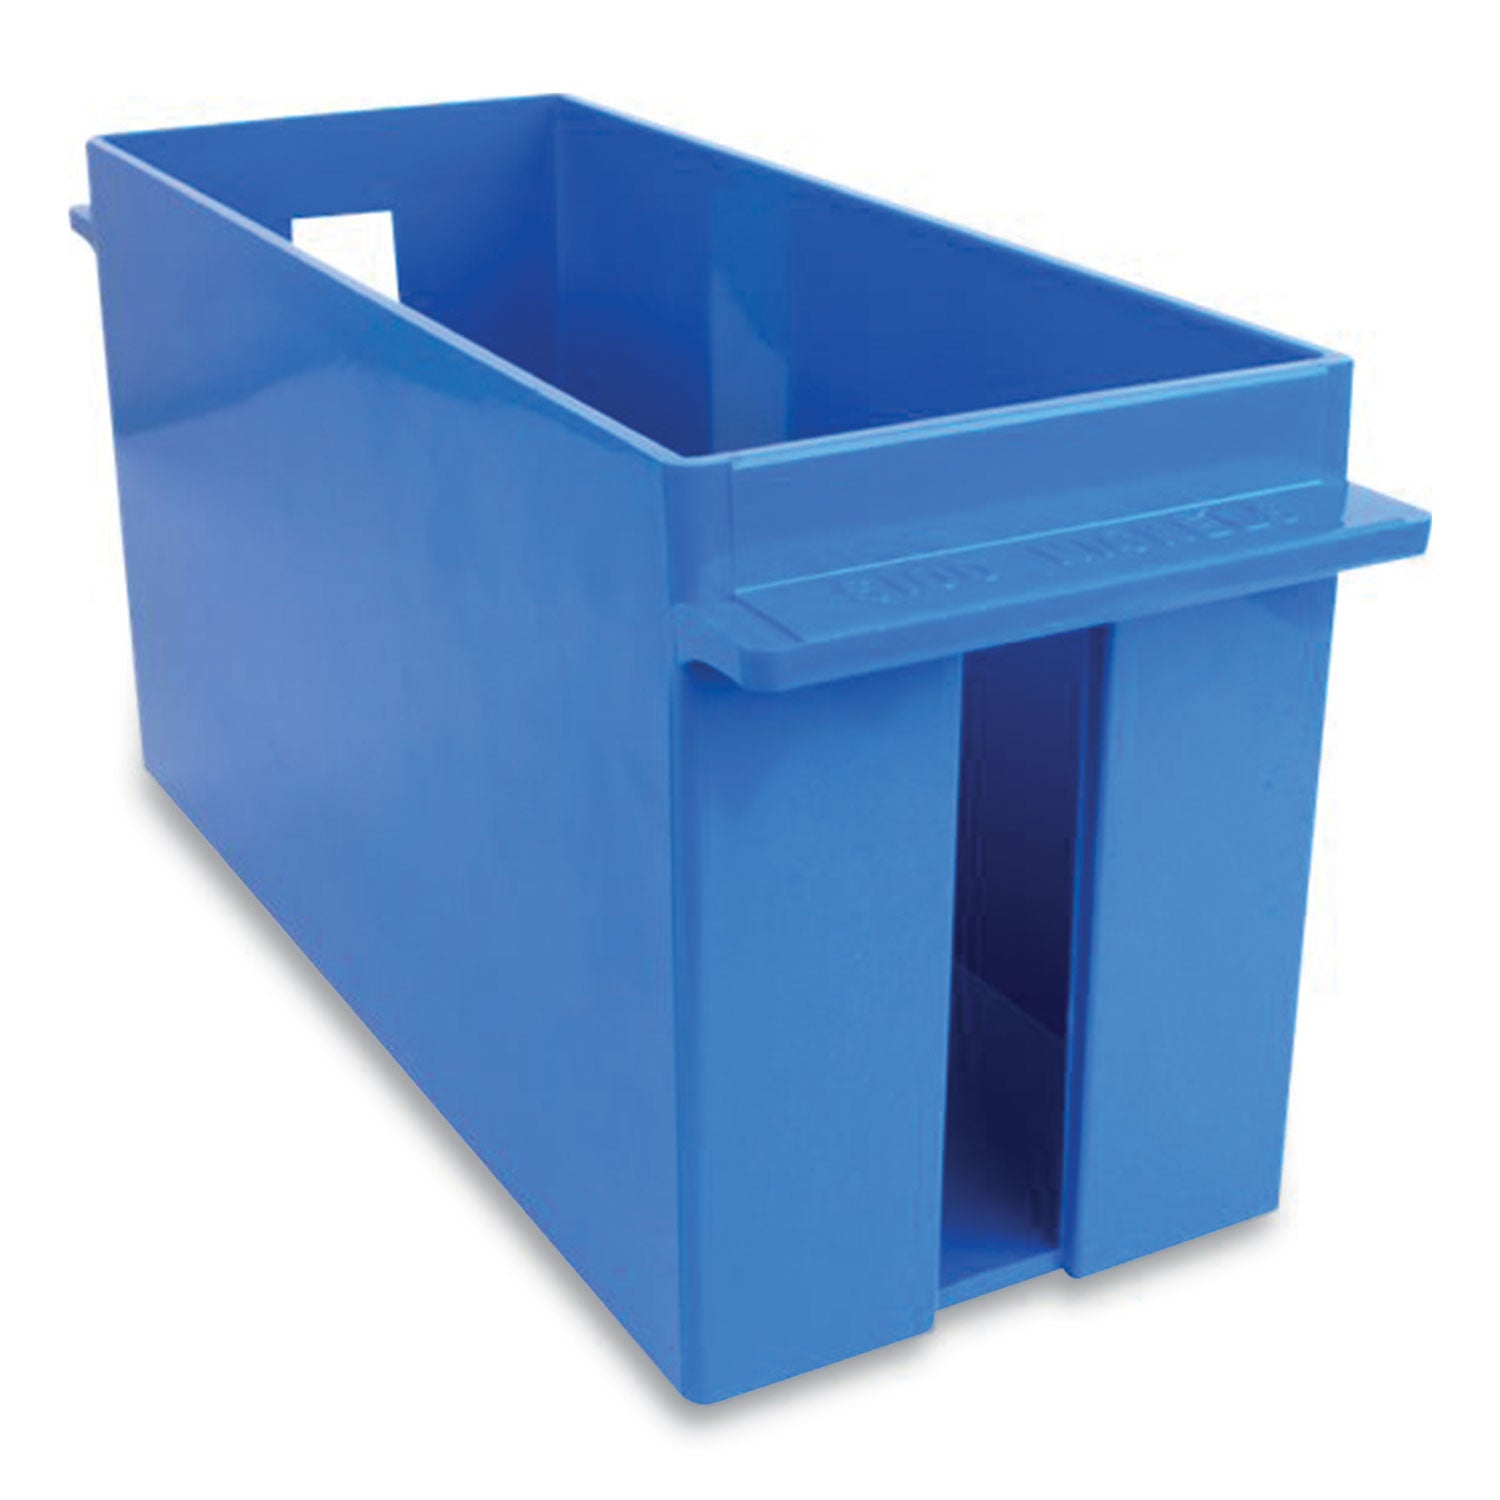 extra-capacity-coin-tray-nickels-1-compartment-denomination-and-capacity-etched-on-side-105-x-475-x-5-plastic-blue_cnk560164 - 2